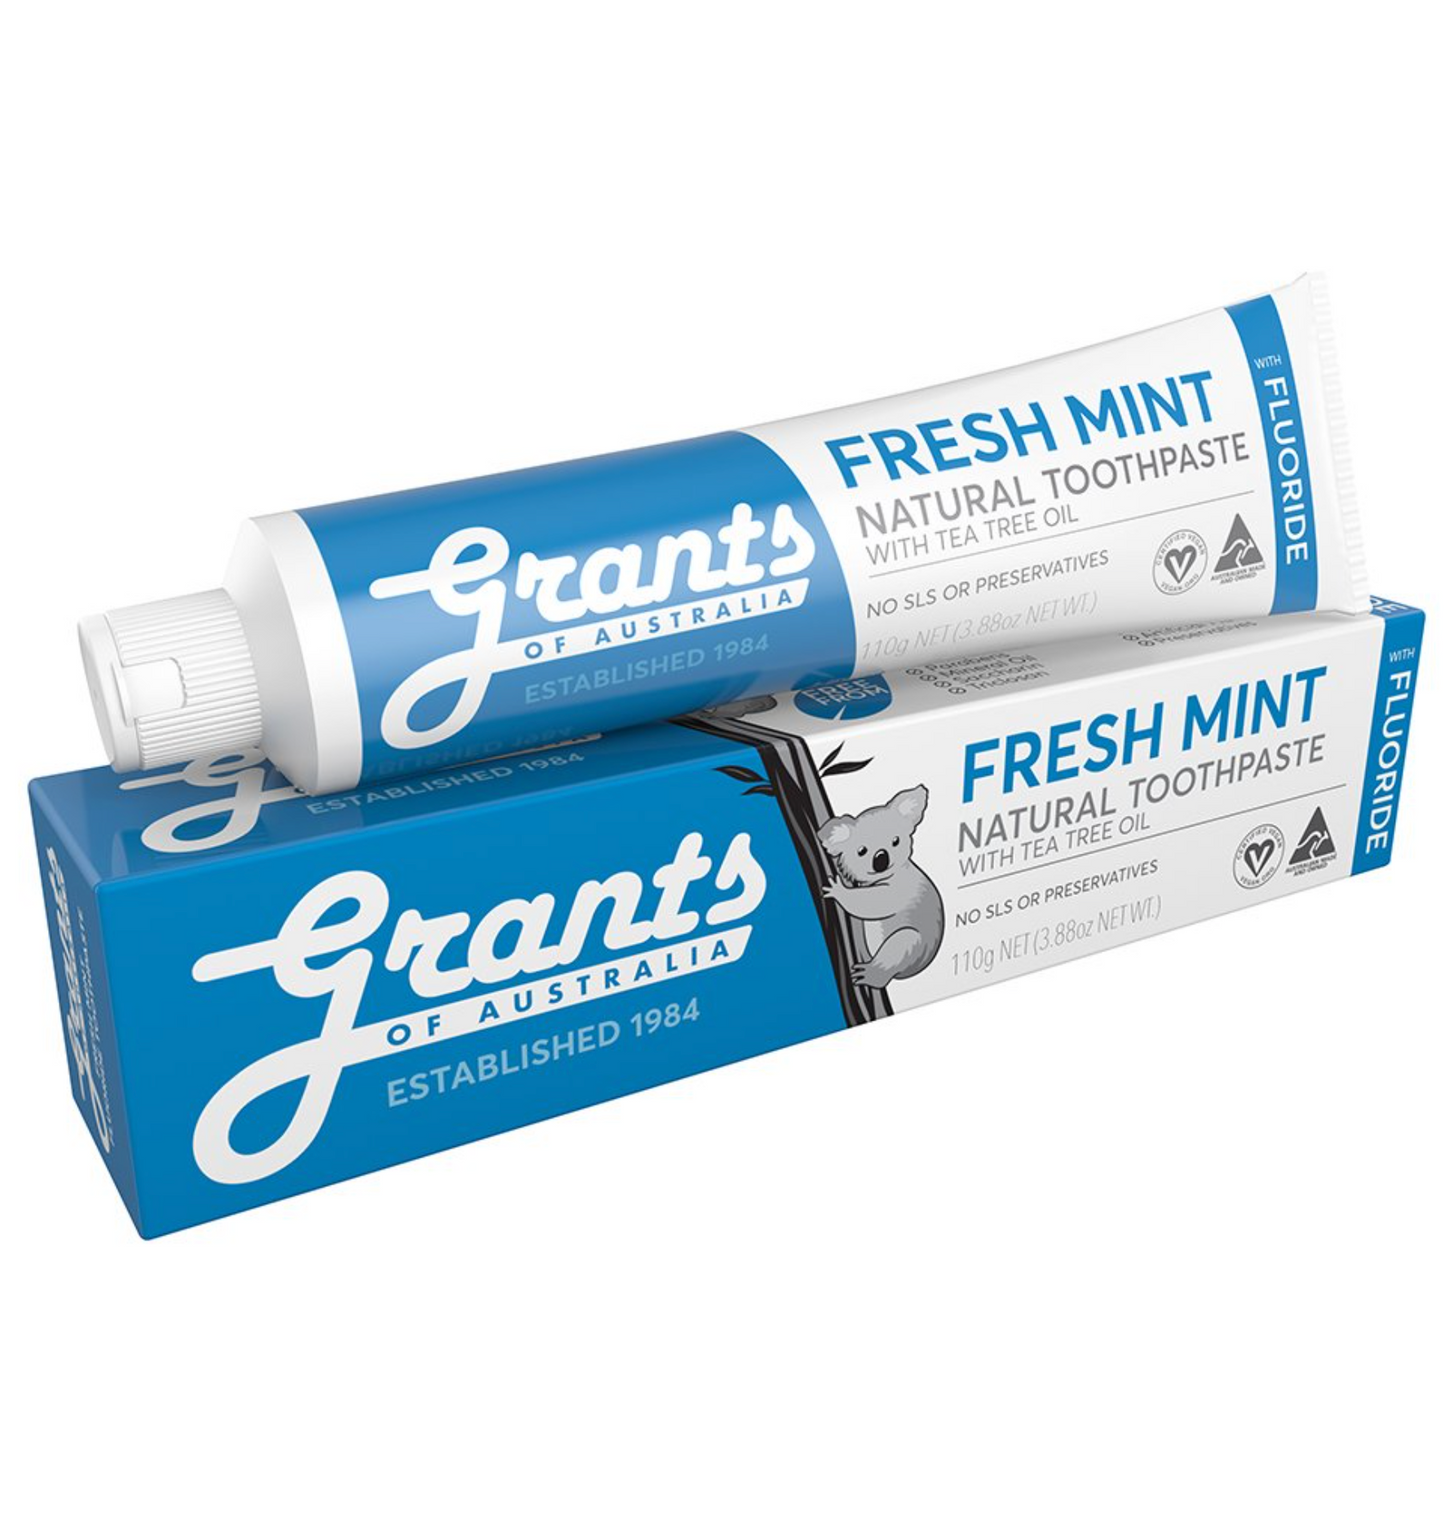 Grants Natural Toothpaste 110g, Fresh Mint With Tea Tree Oil, Contains Fluoride